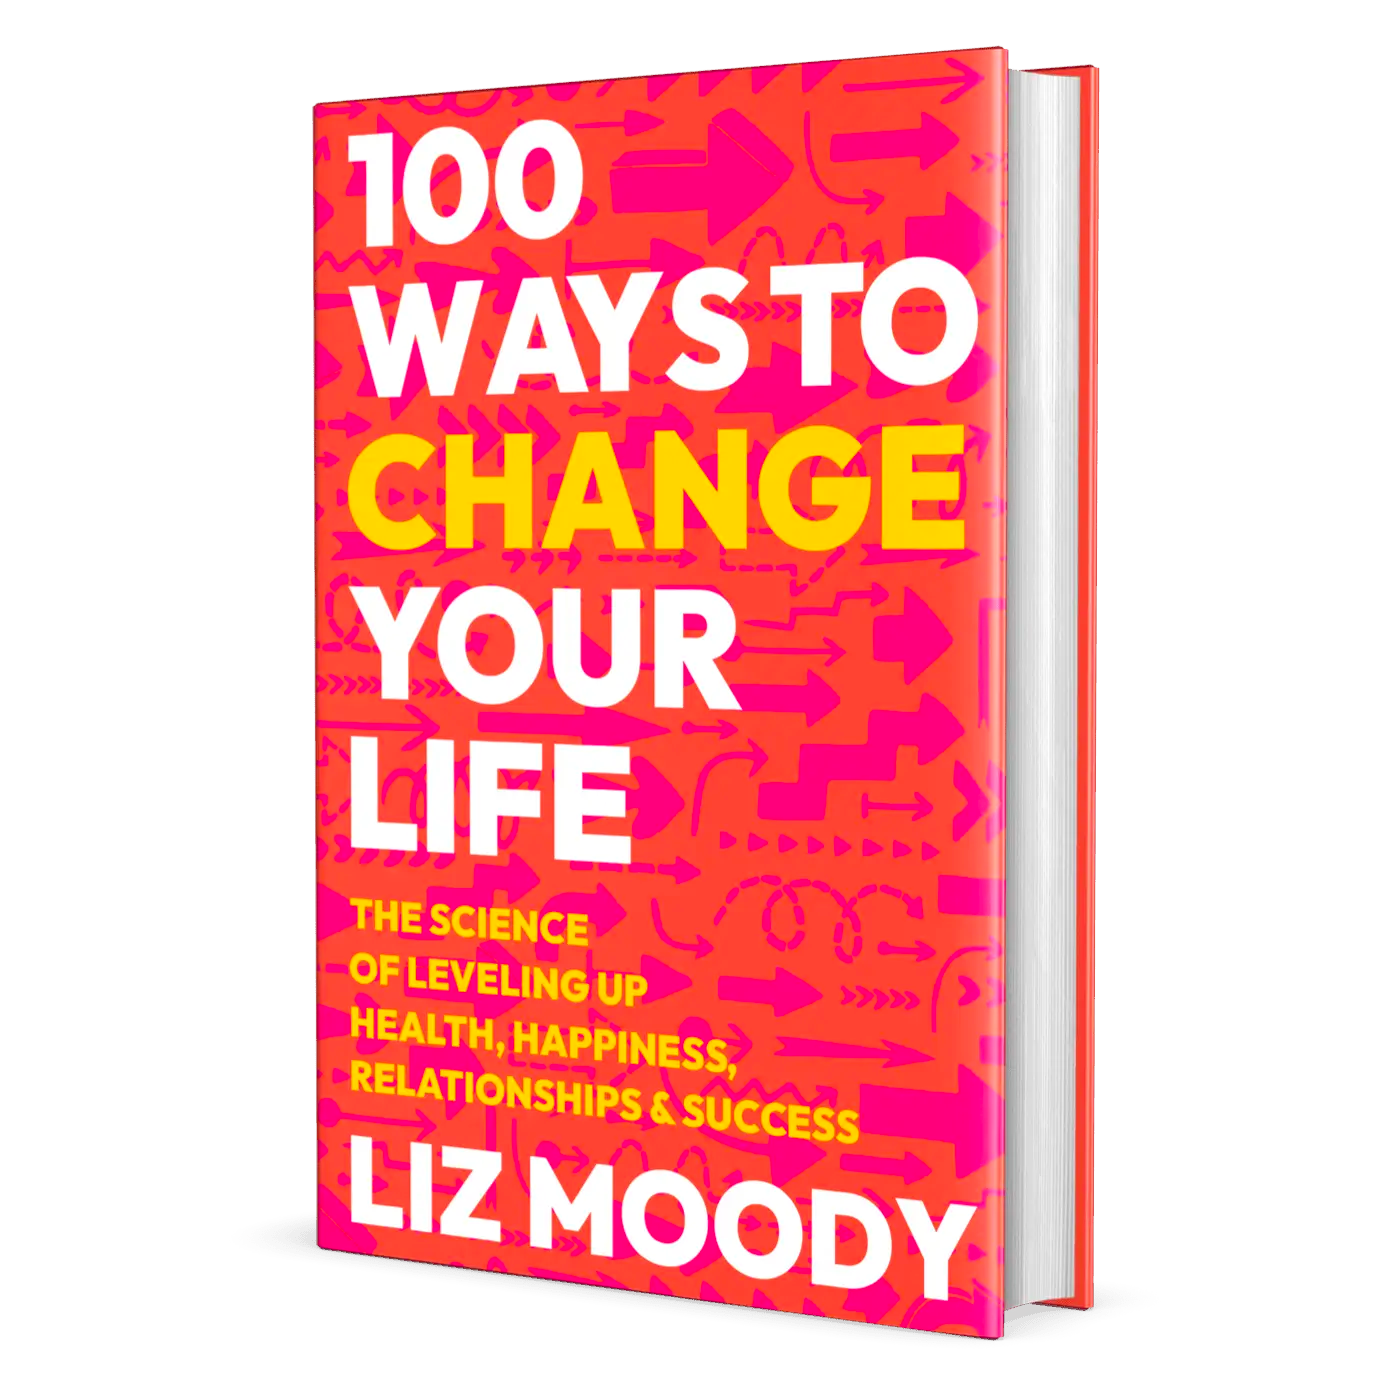 100 Ways To Change Your Life (Signed!)